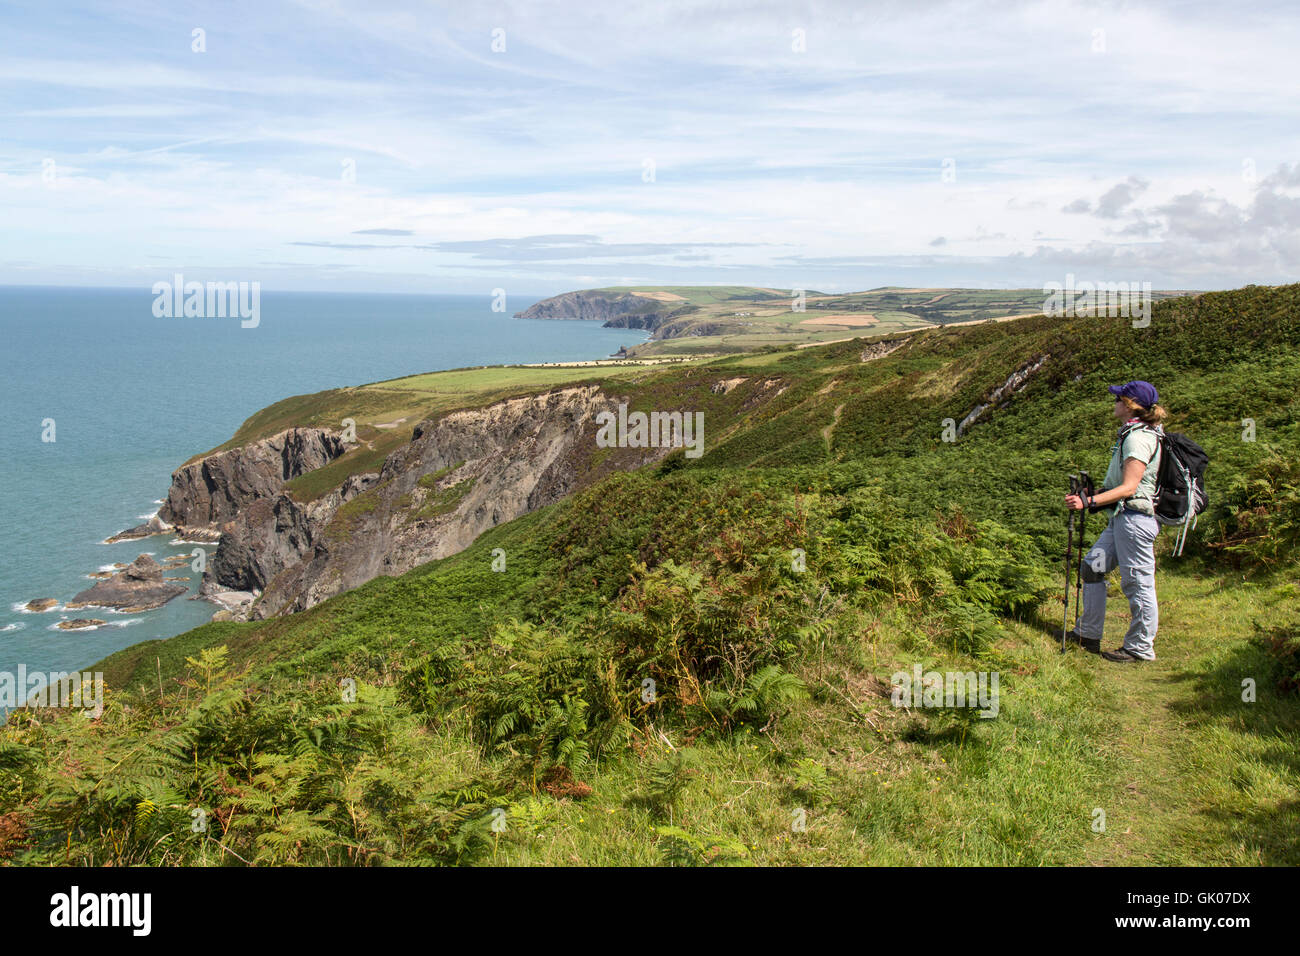 Part of the Pembrokeshire Coastal Path near Newport Sands, in South West Wales. The path is a designated national Trail. Stock Photo